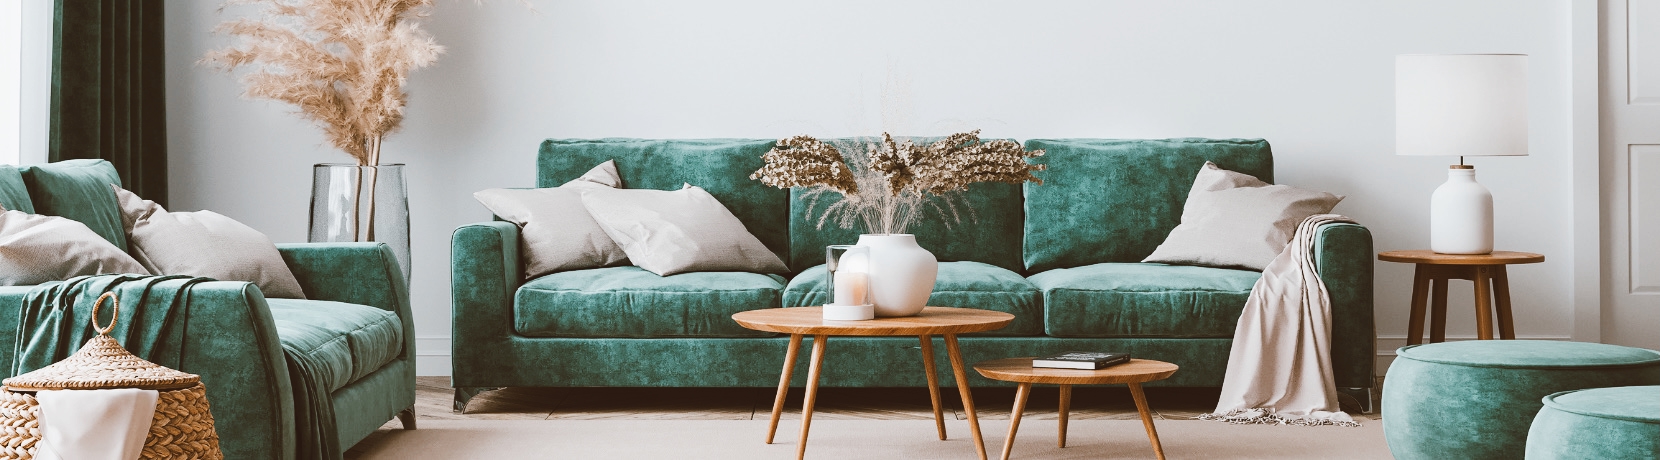 Teal couch in a living room